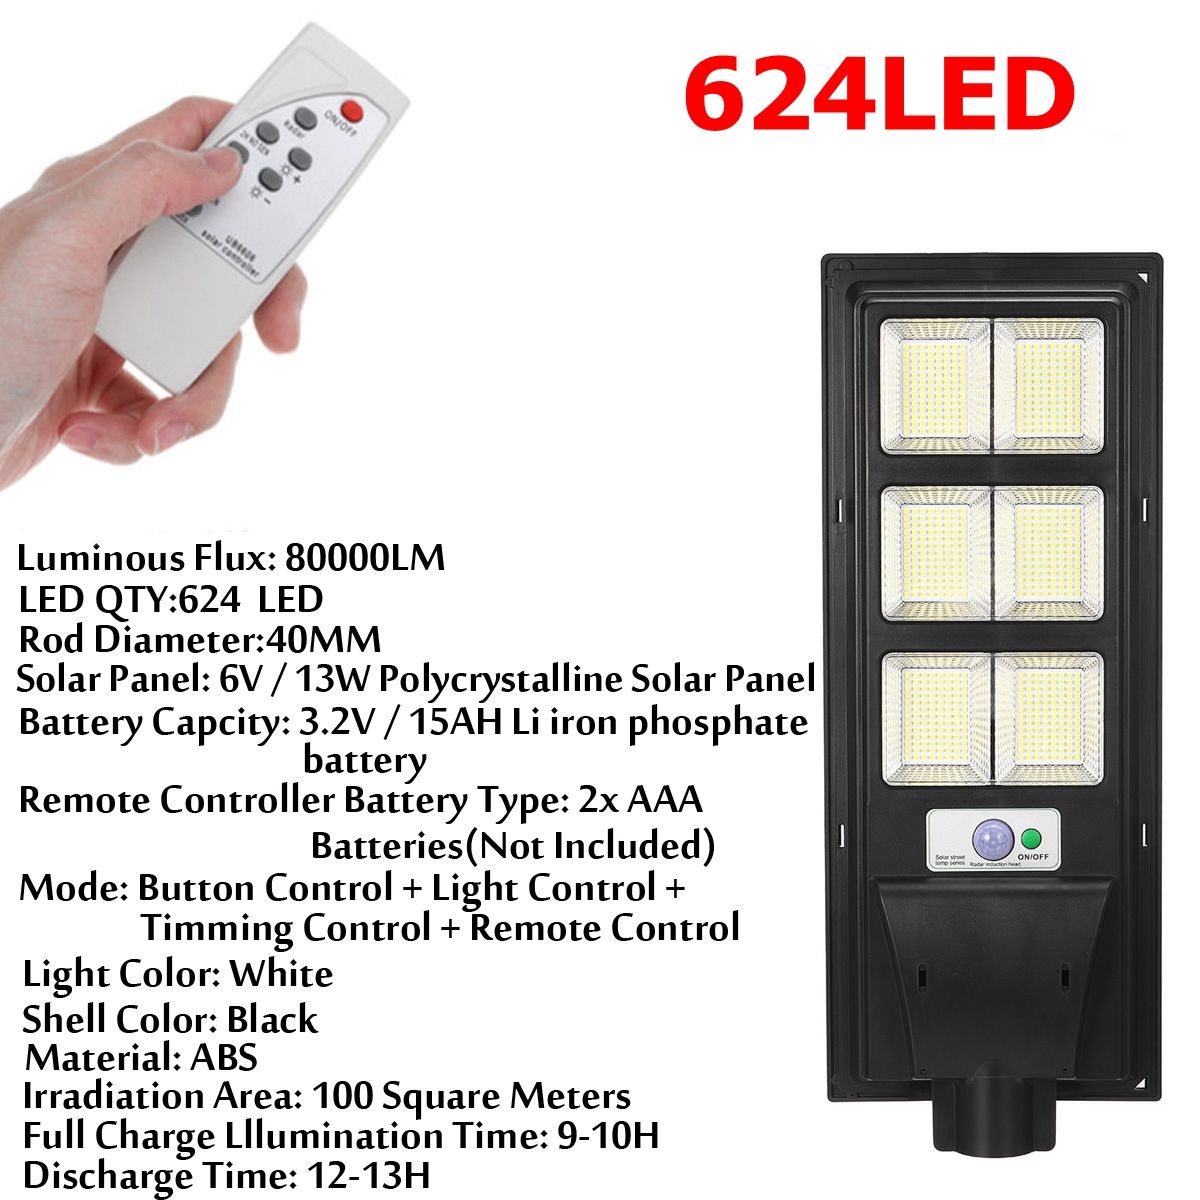 208416624832LED-Solar-Powered-Wall-Street-Light-PIR-Motion-Sensor-Dimmable-Lamp--Remote-Control-1740482